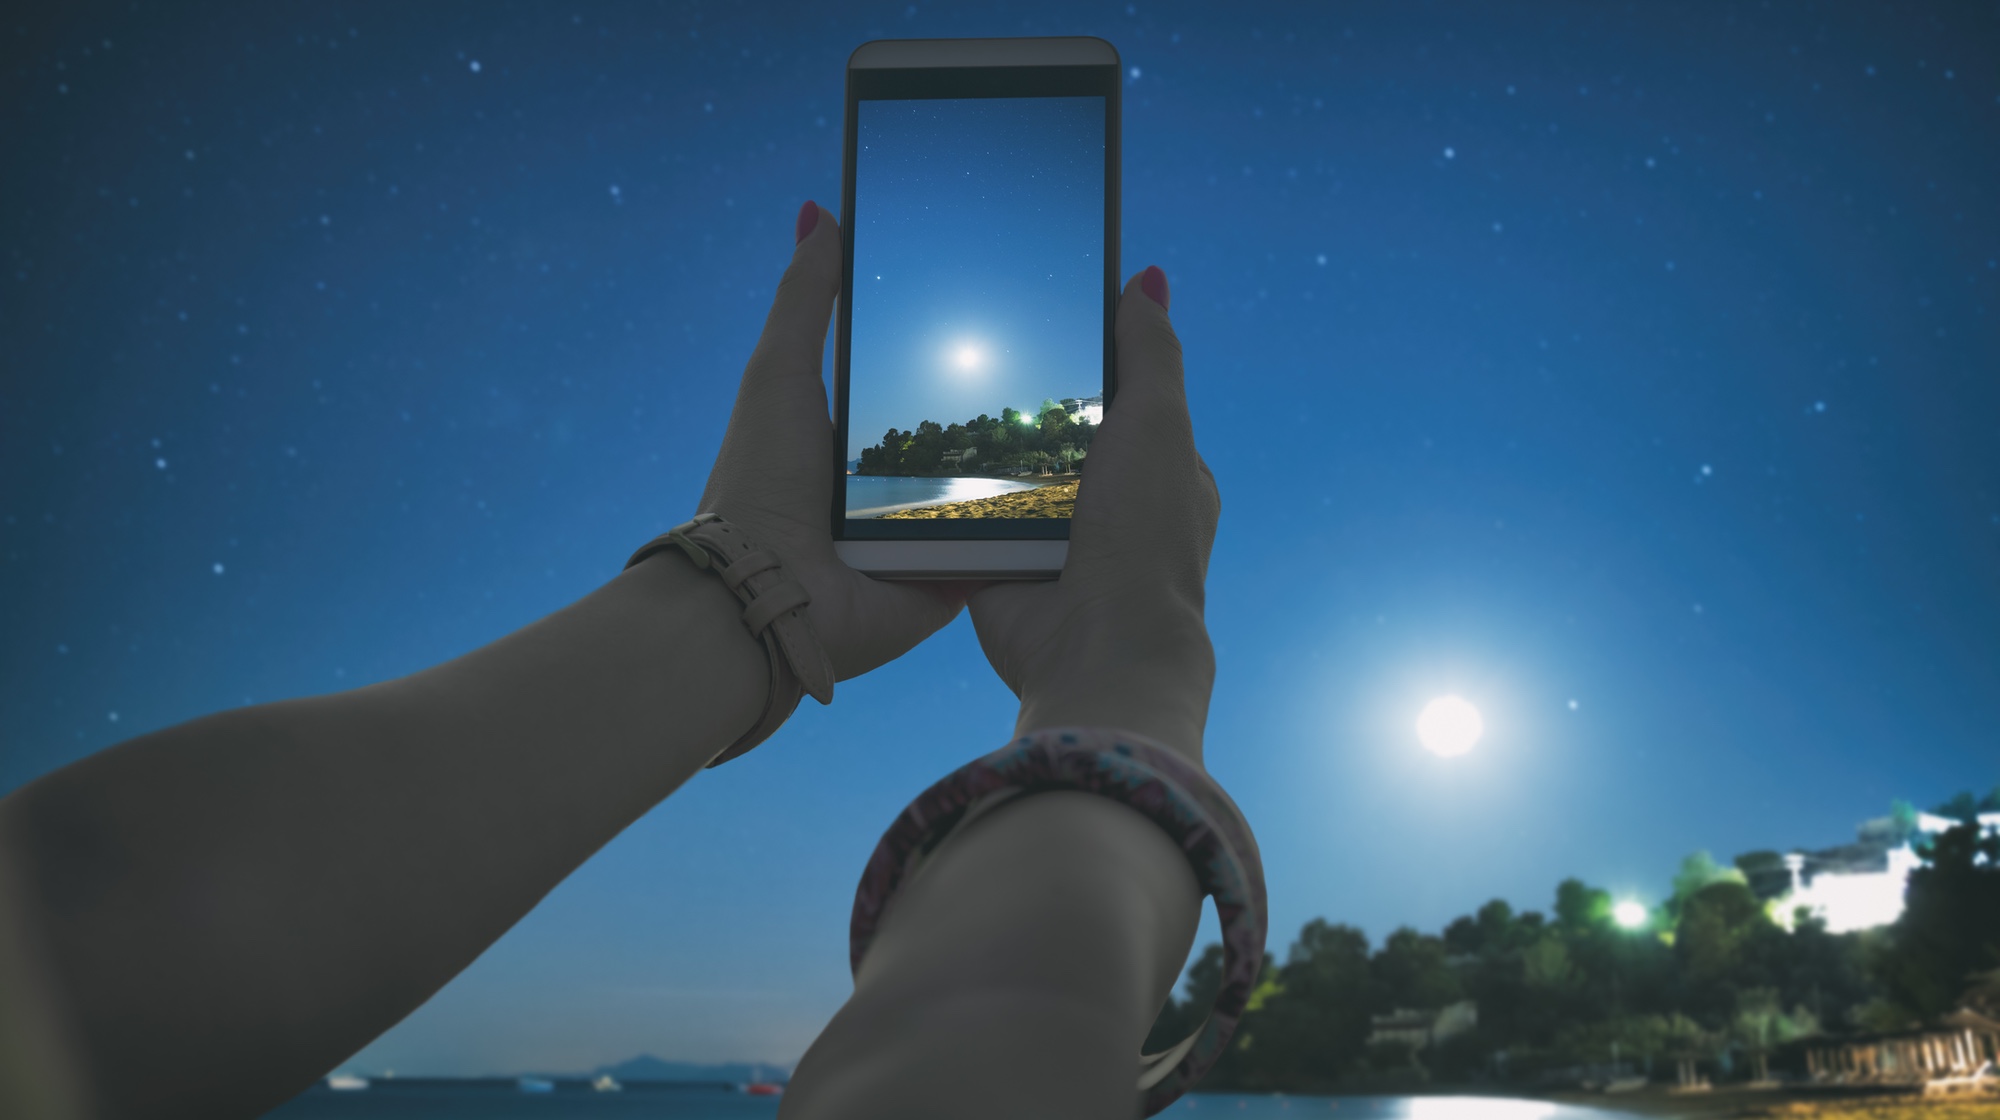 12 Best Stargazing Apps to Identify Constellations and Planets